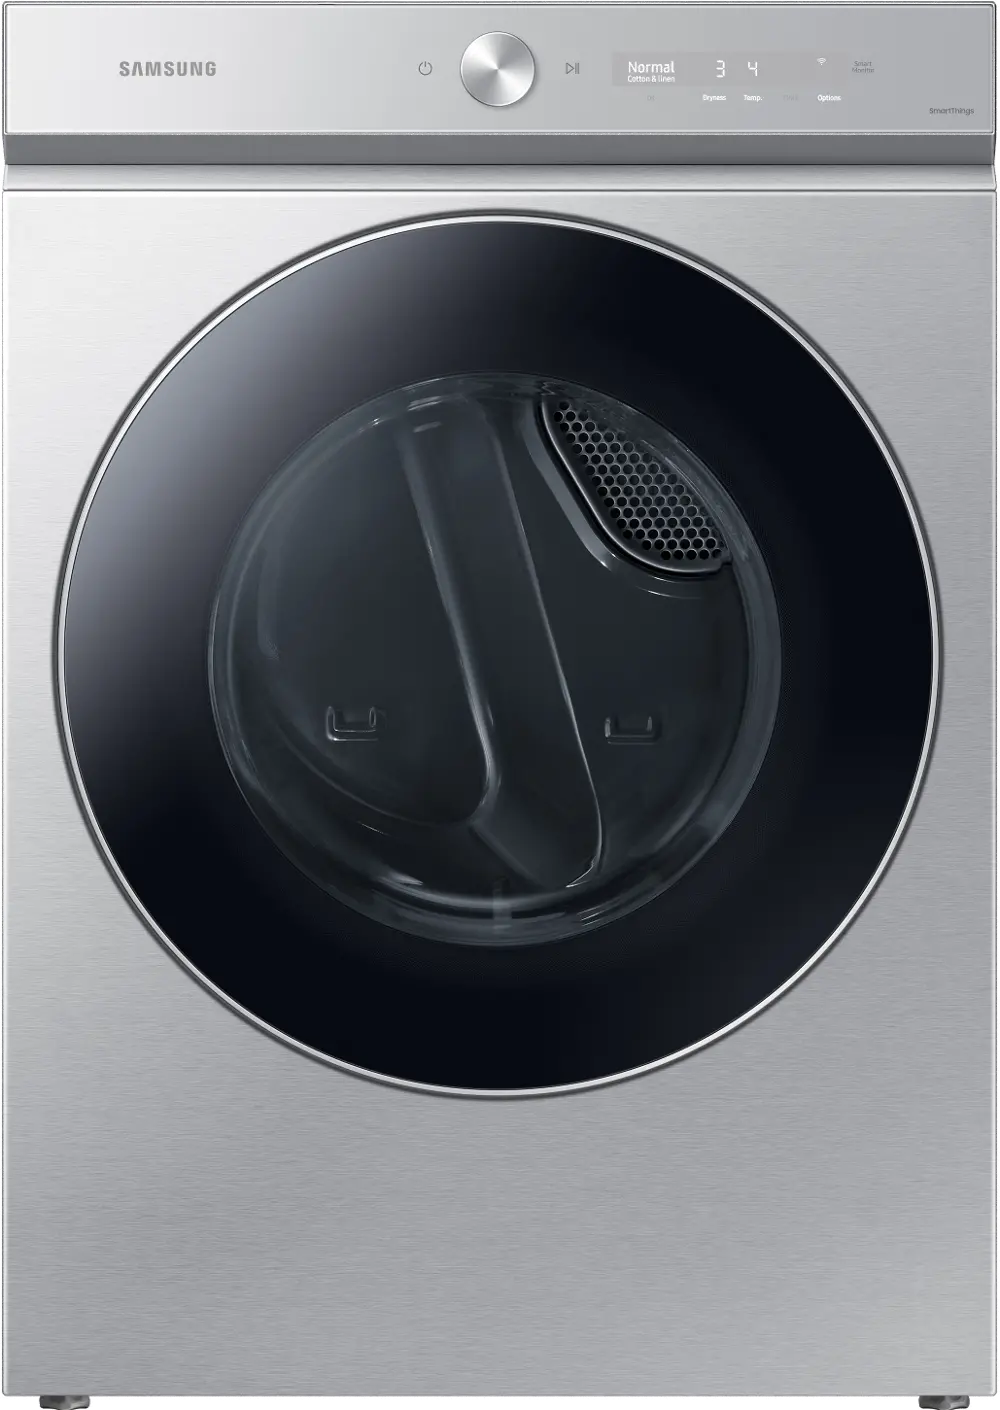 DVG53BB8900T Samsung Bespoke 7.6 cu ft Gas Dryer with Smart Dial - Silver Steel 53BB8900-1